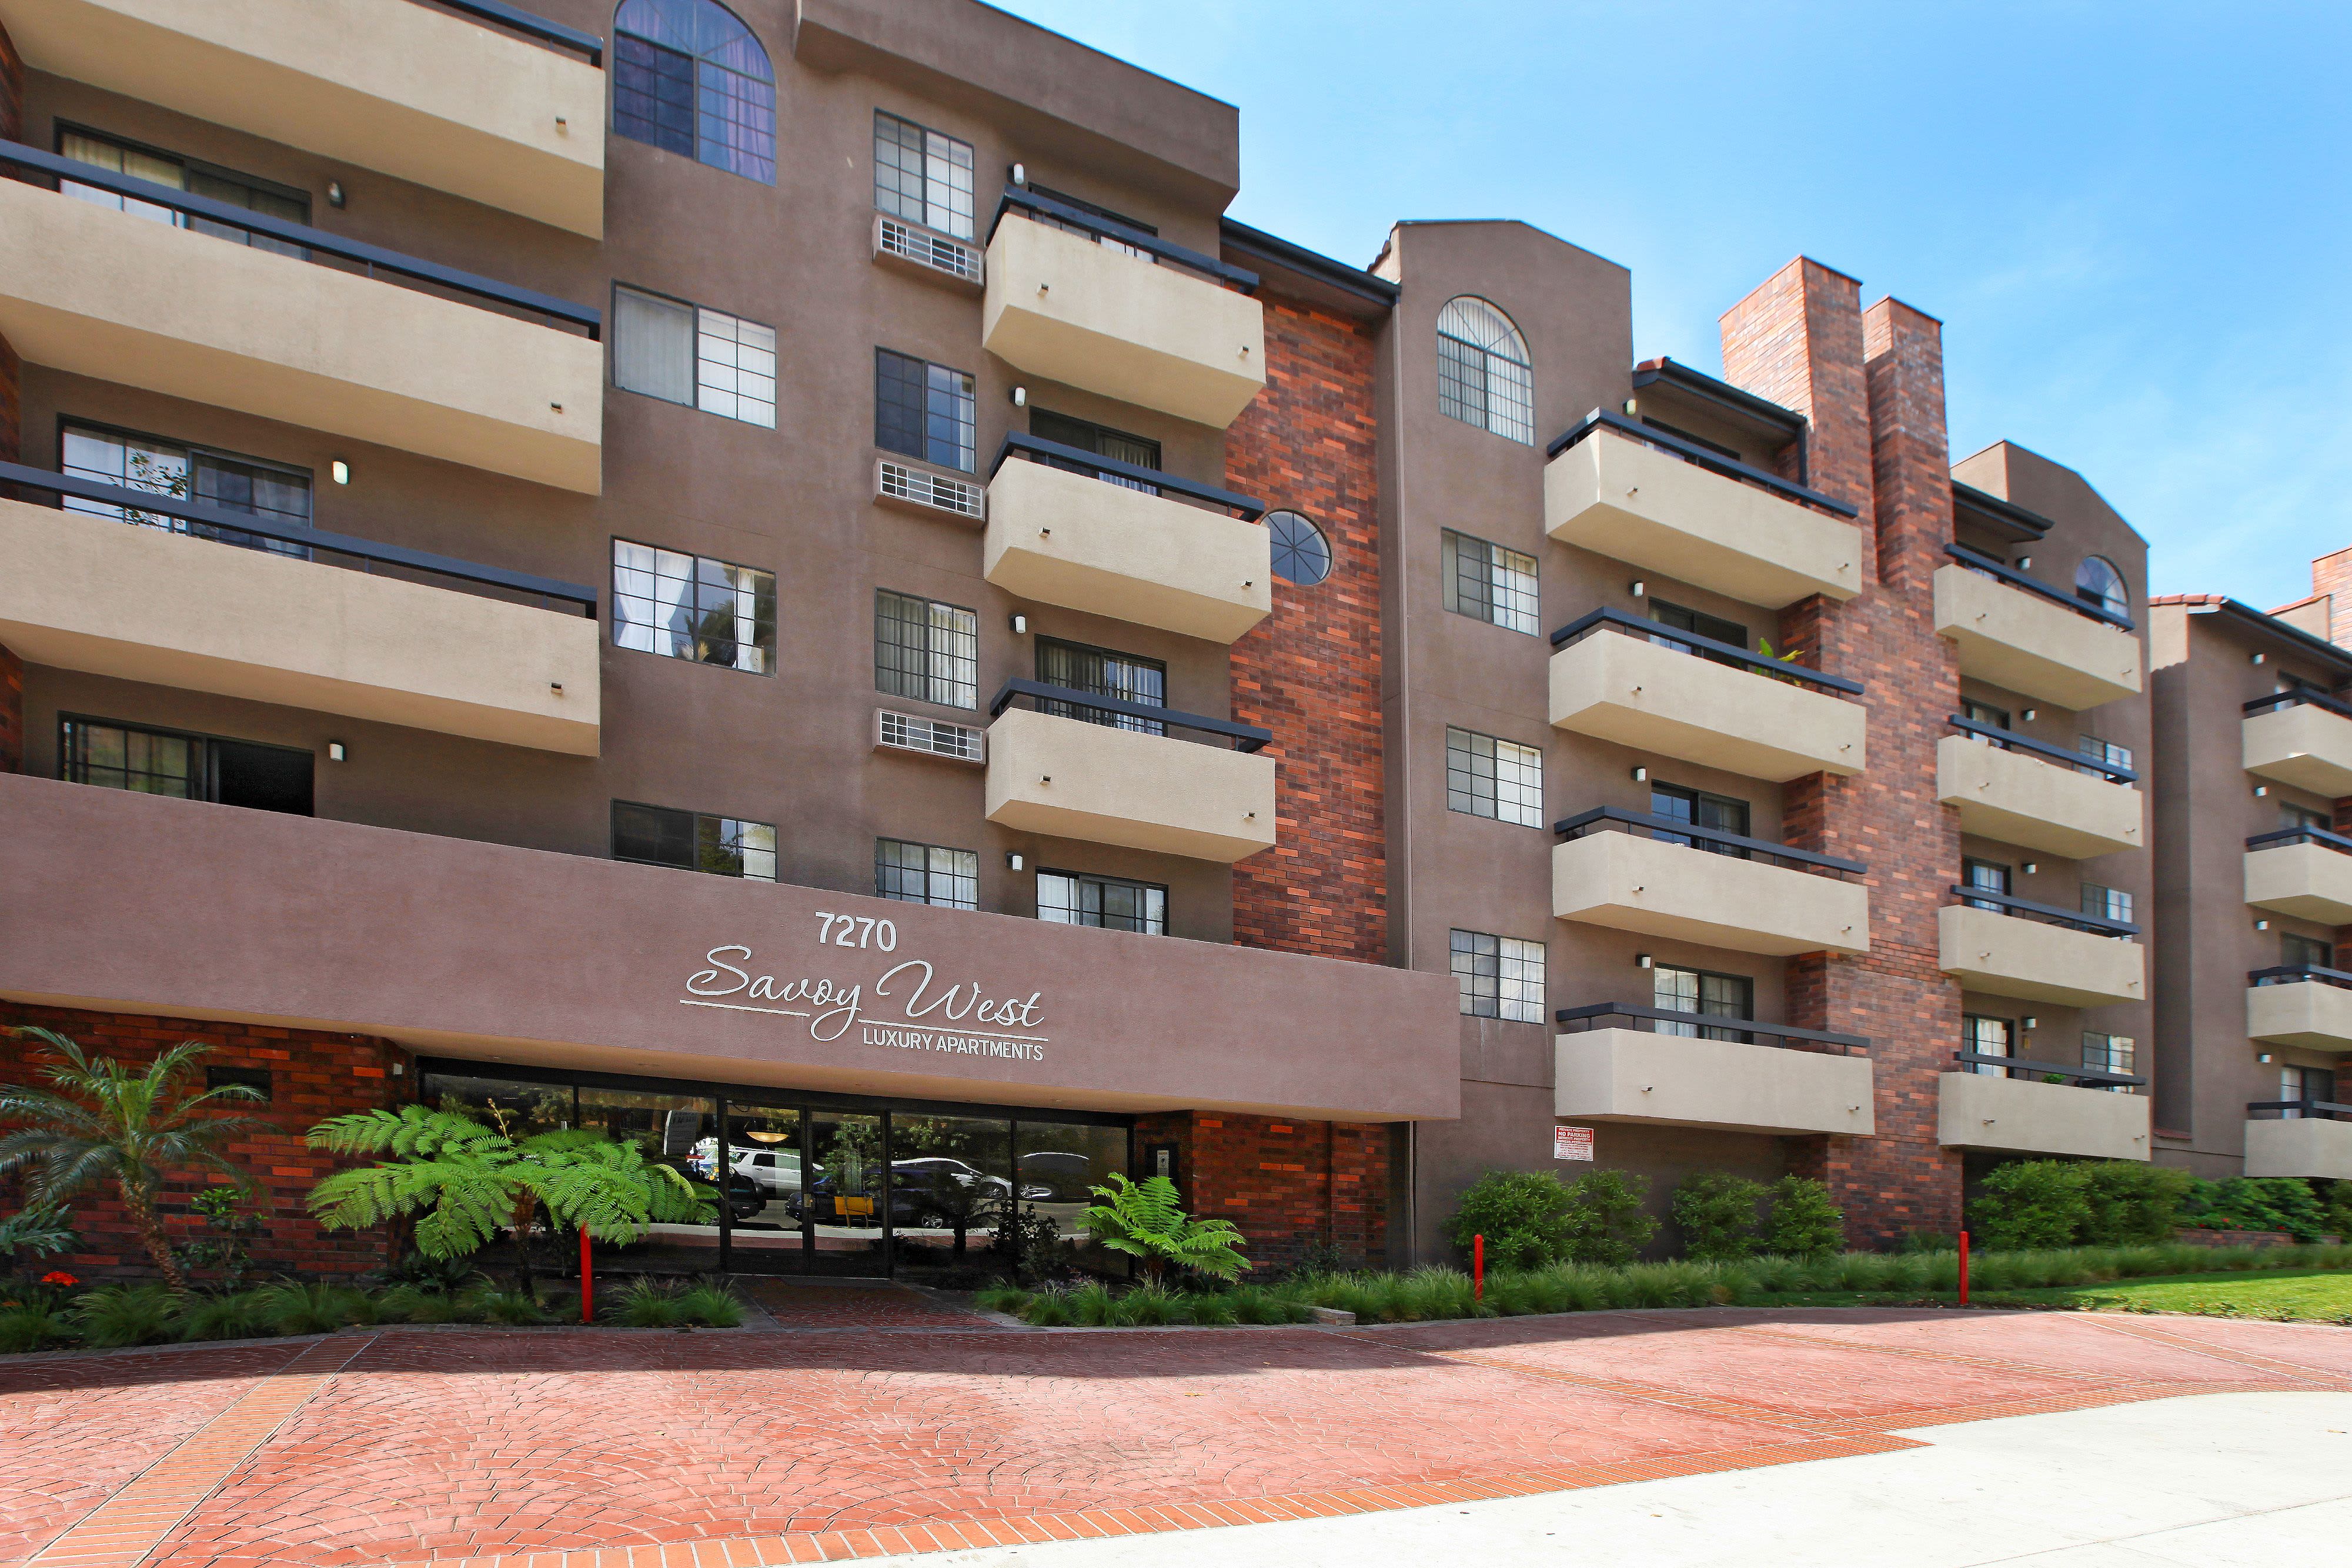 Exterior of Savoy West Apartments in Los Angeles, California